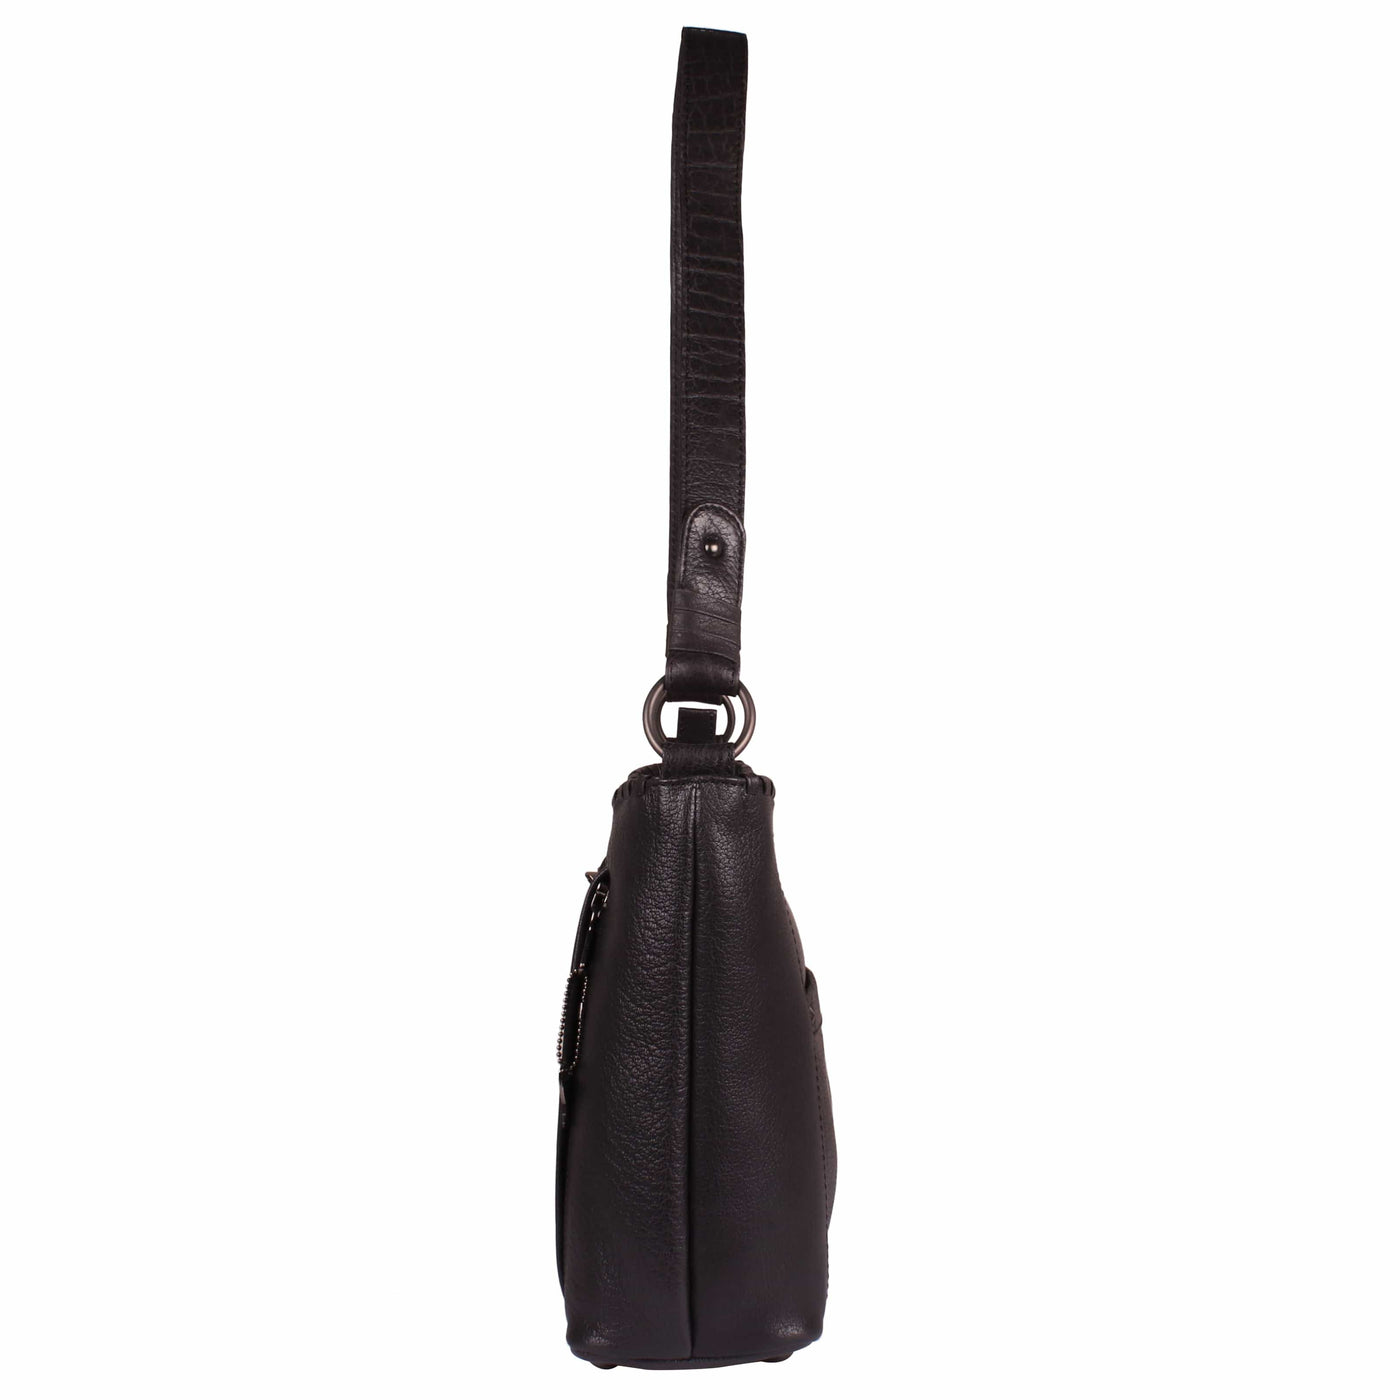 Concealed Carry Juliana Leather Hobo - Lady Conceal - Concealed Carry Purse - Lady Conceal